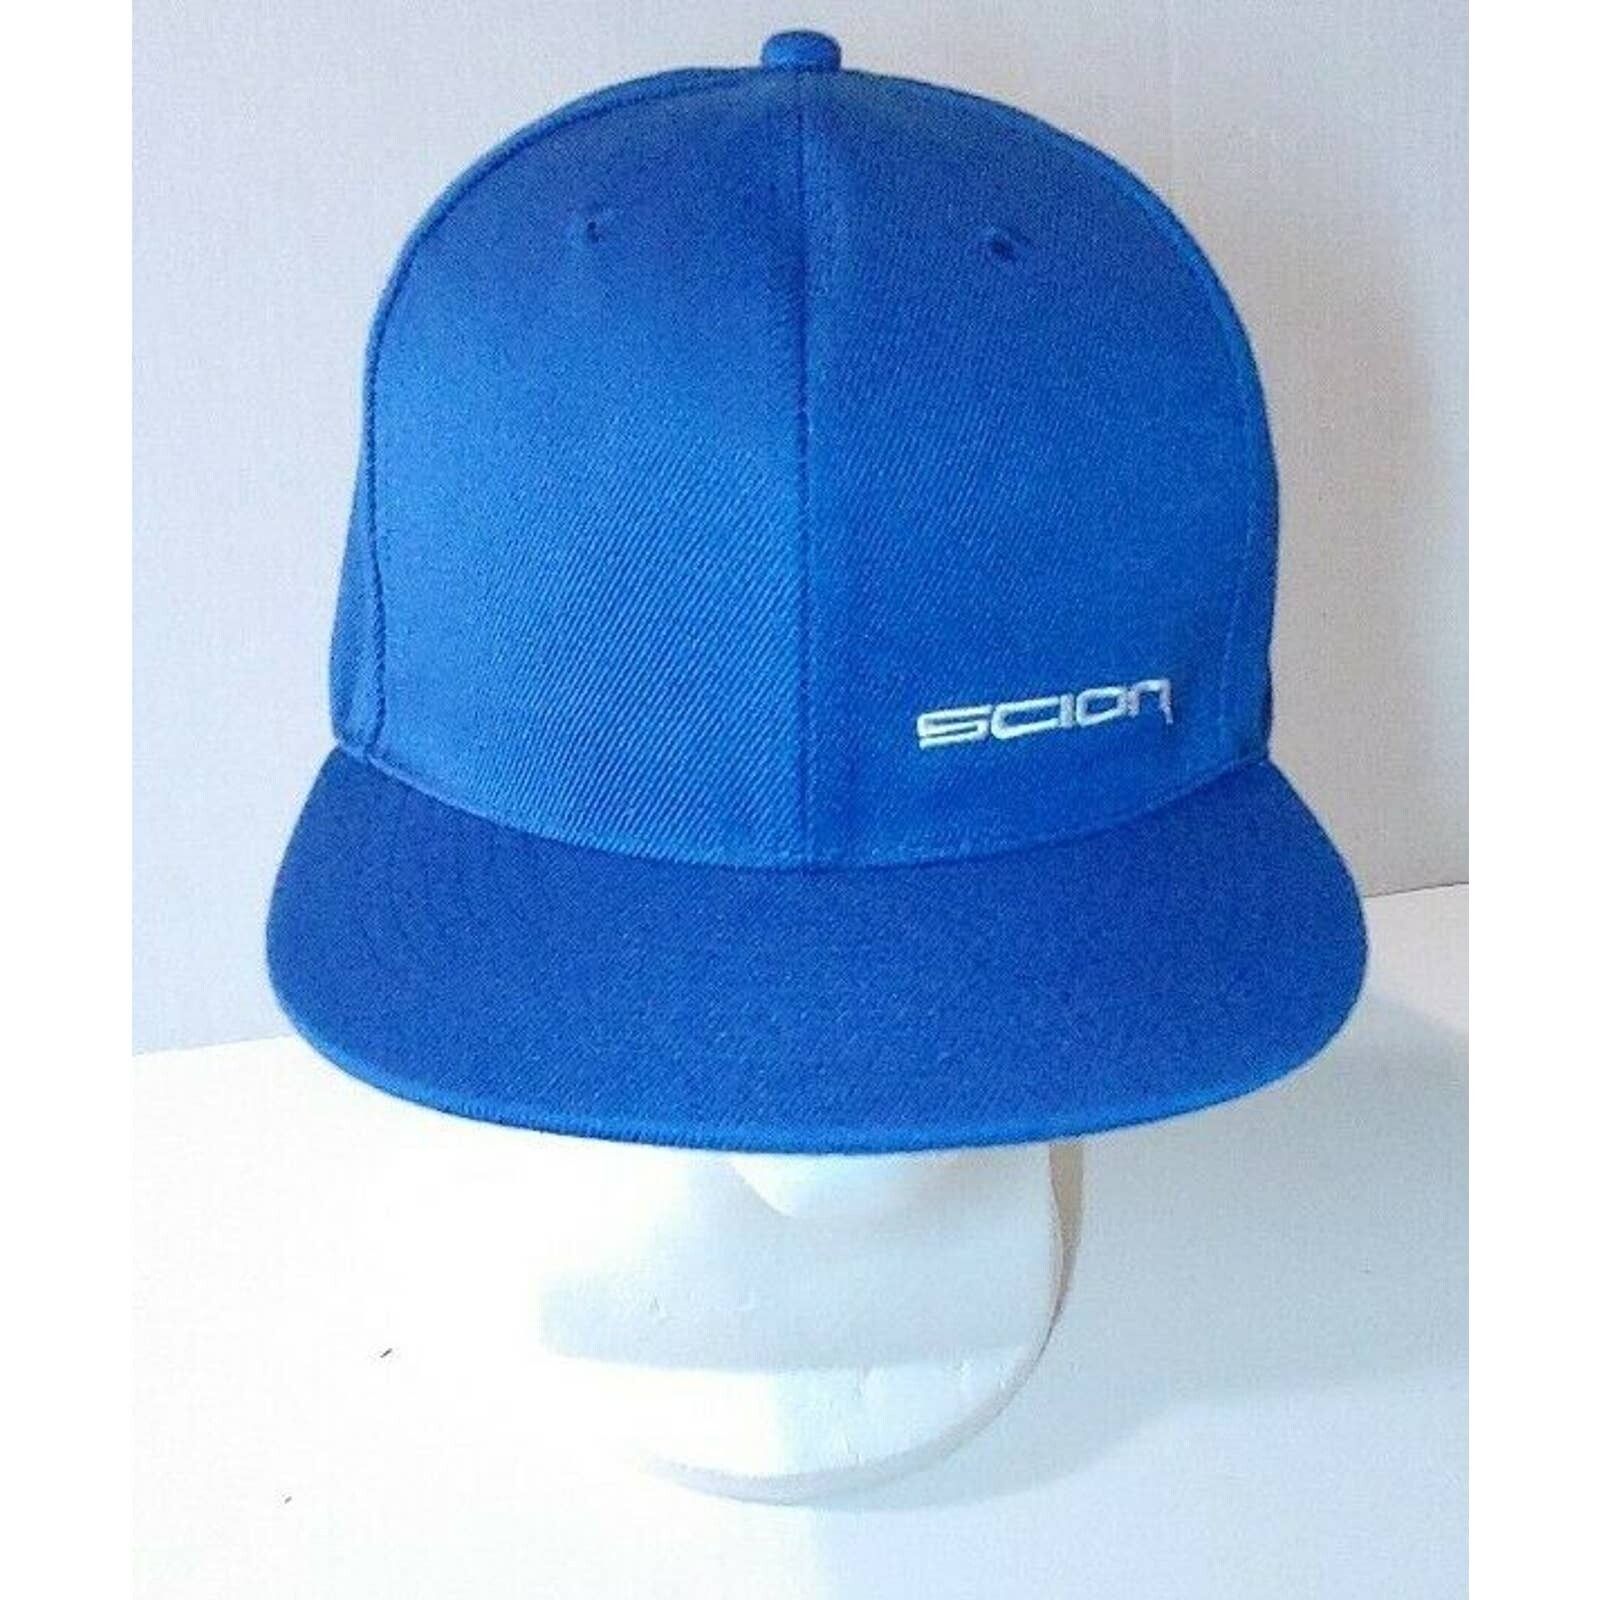 Other SCION TOYOTA Baseball Cap Hat Adjustable Blue Snapback Size ONE SIZE - 1 Preview